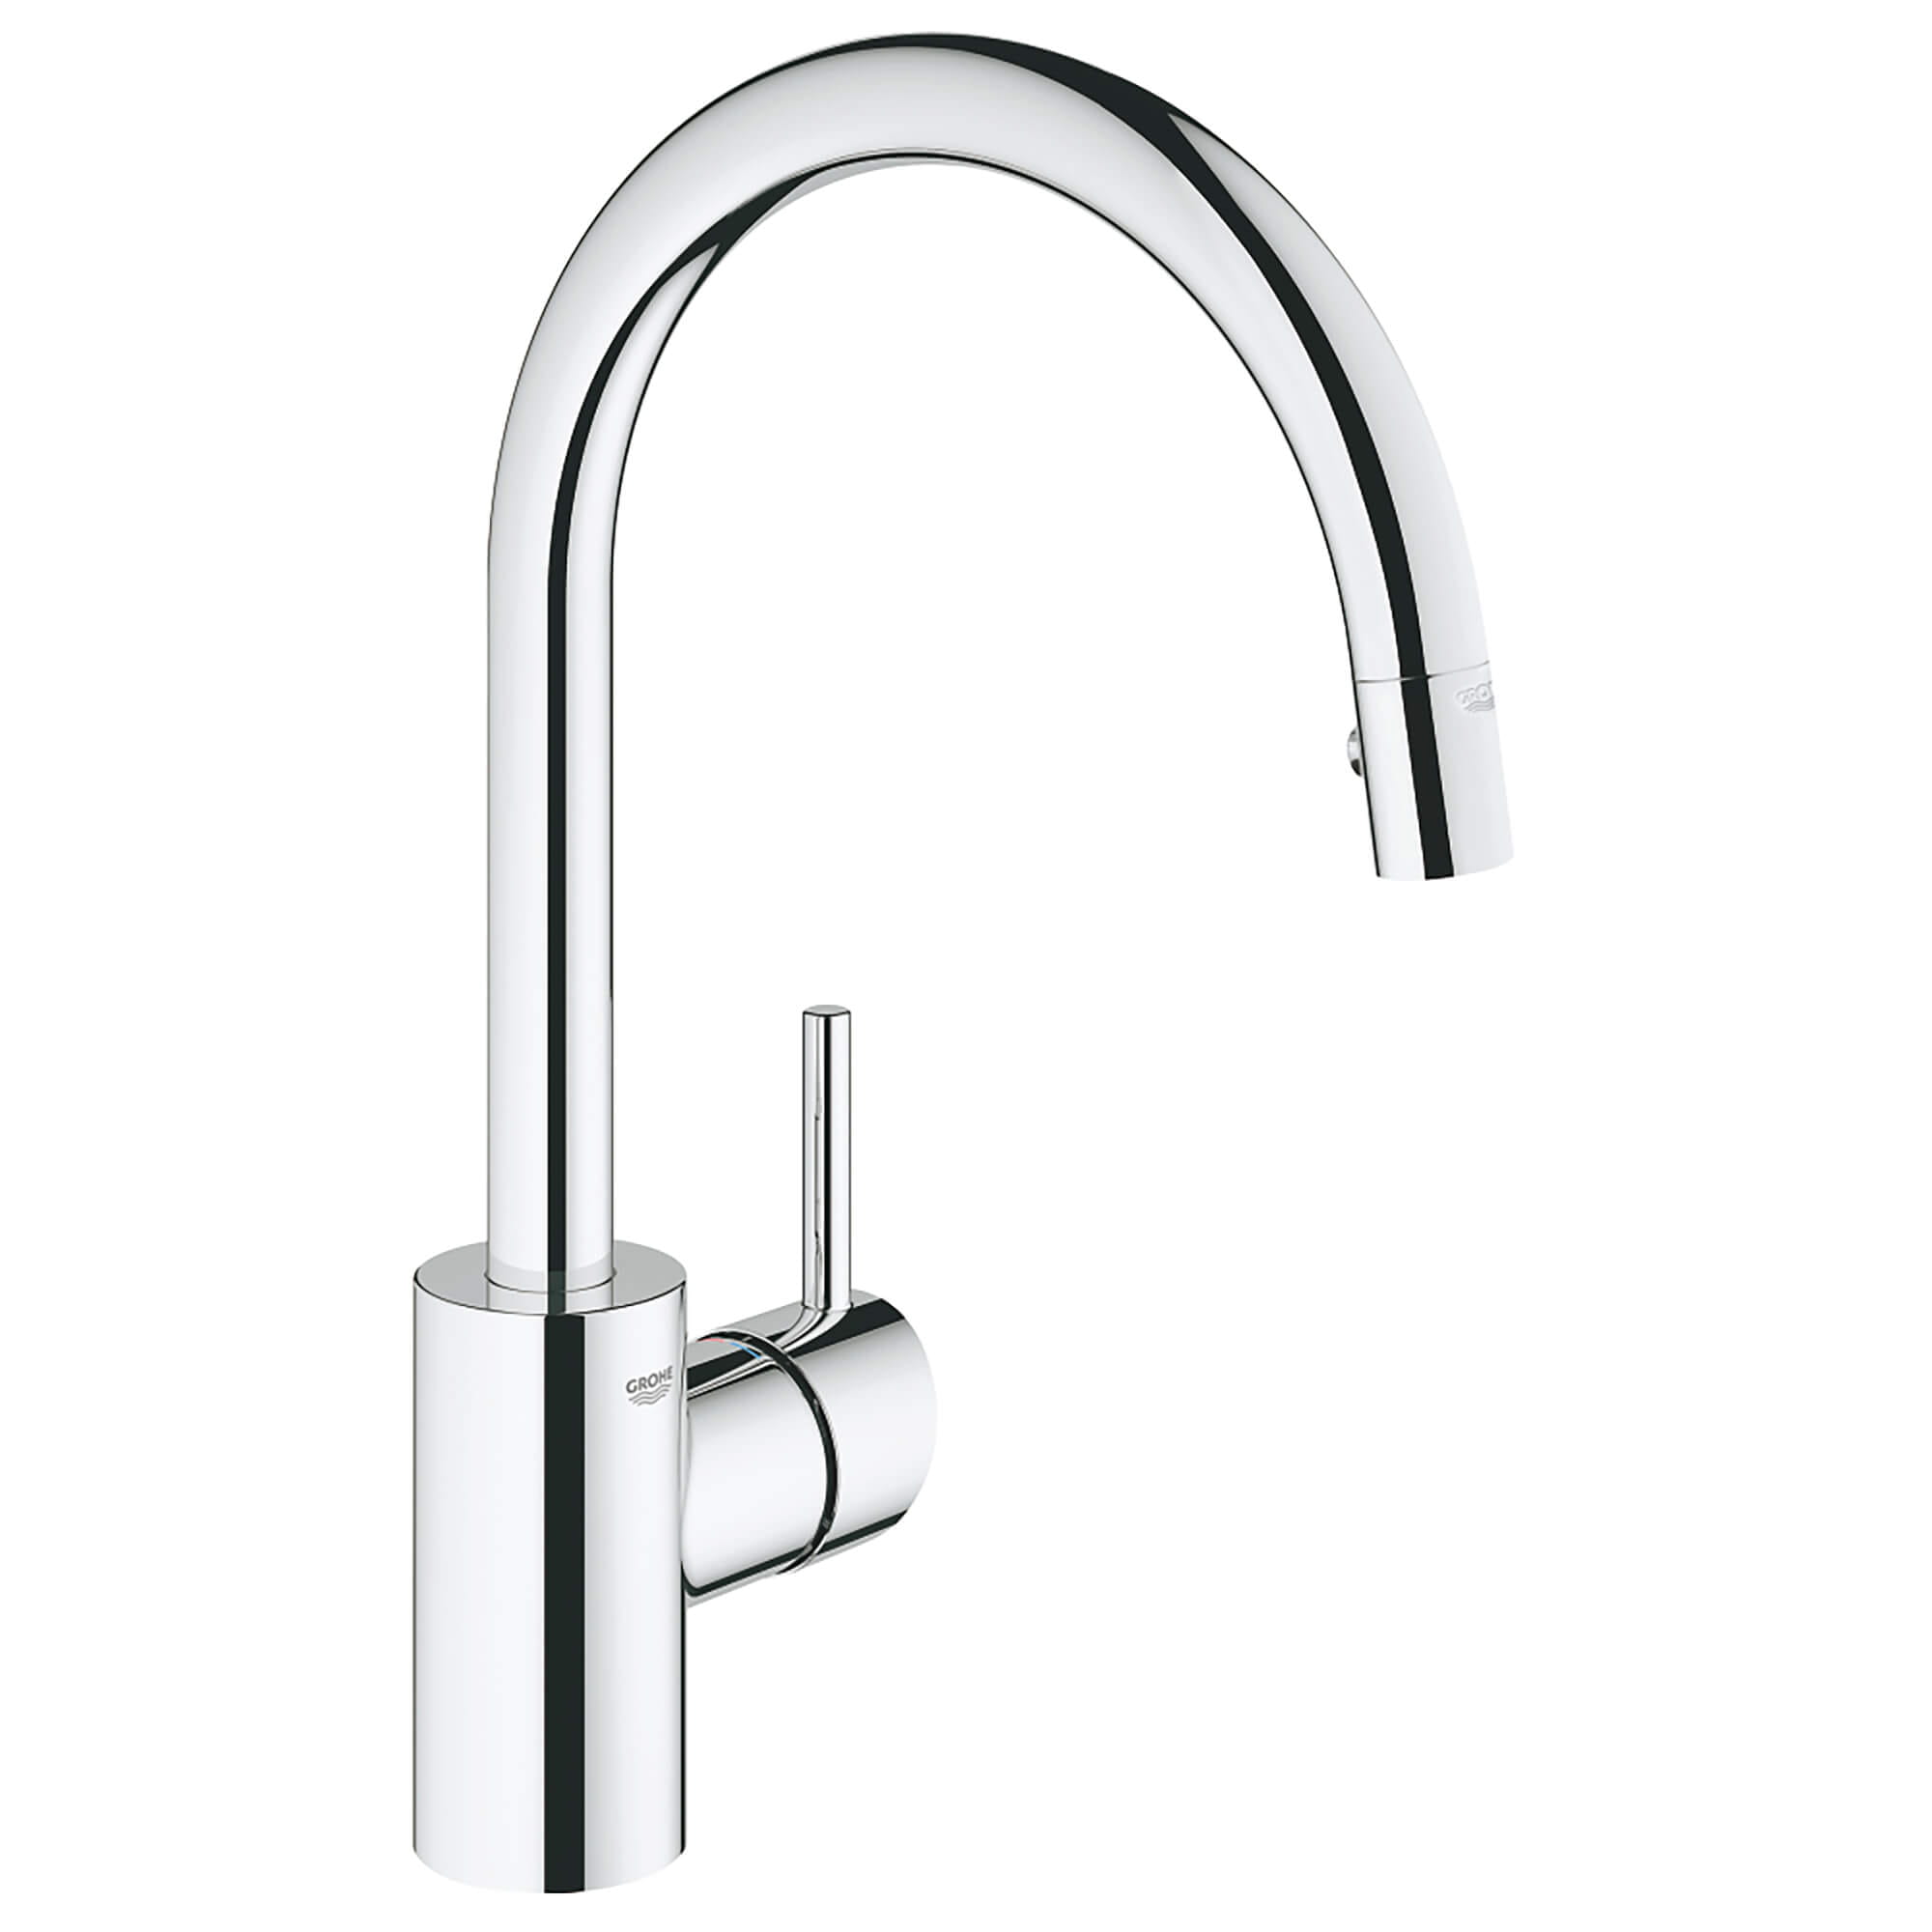 SINGLE-HANDLE PULL DOWN KITCHEN FAUCET DUAL SPRAY 1.5 GPM Model: 3134900E-related